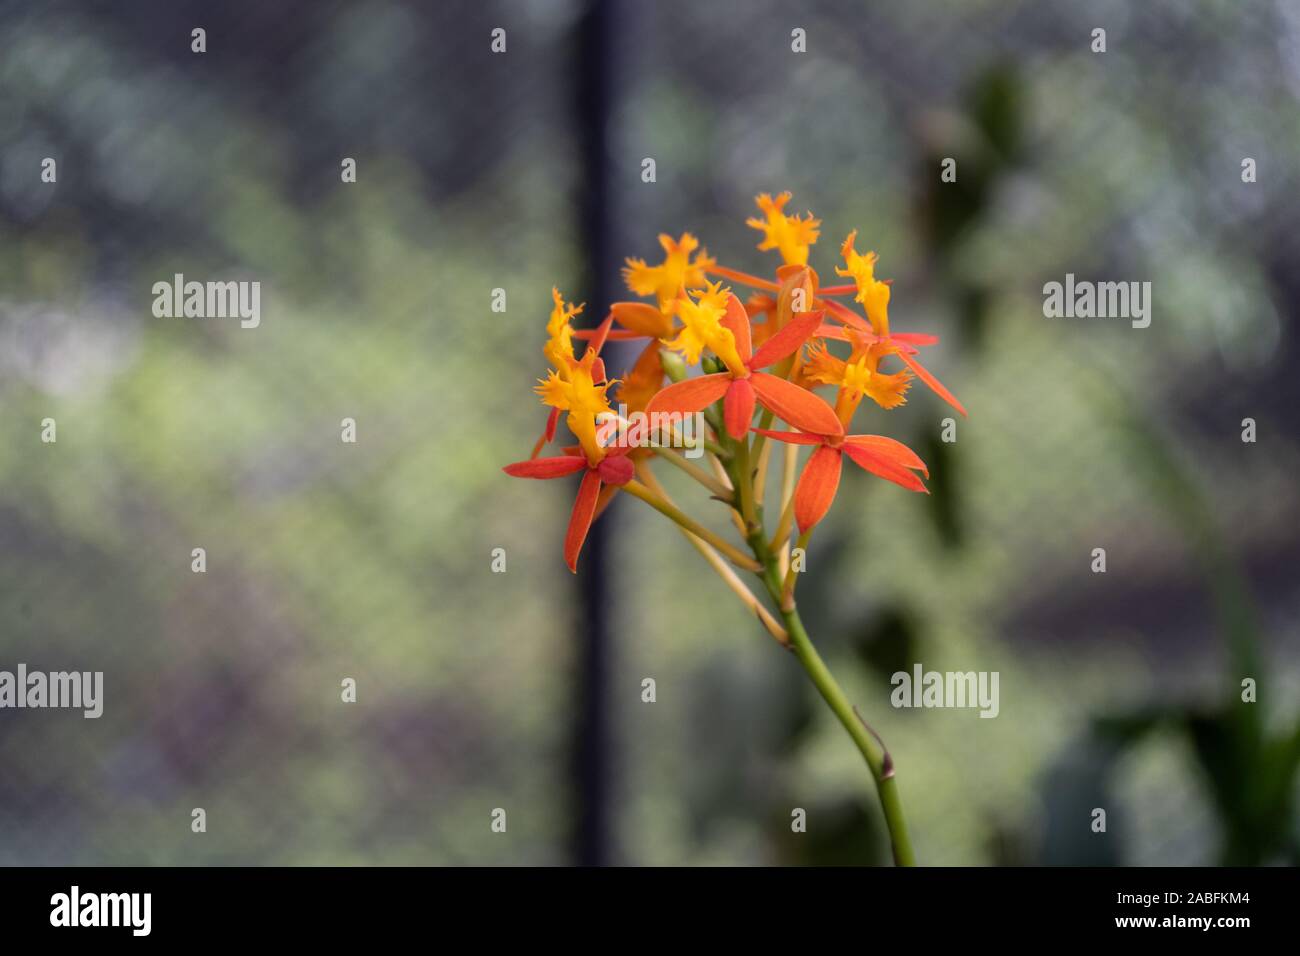 A stem of fire-star orchid growing in the garden. Also known as Epidendrum radicans, rainbow orchid, reed-stem epidendrum, crucifix orchid. Stock Photo